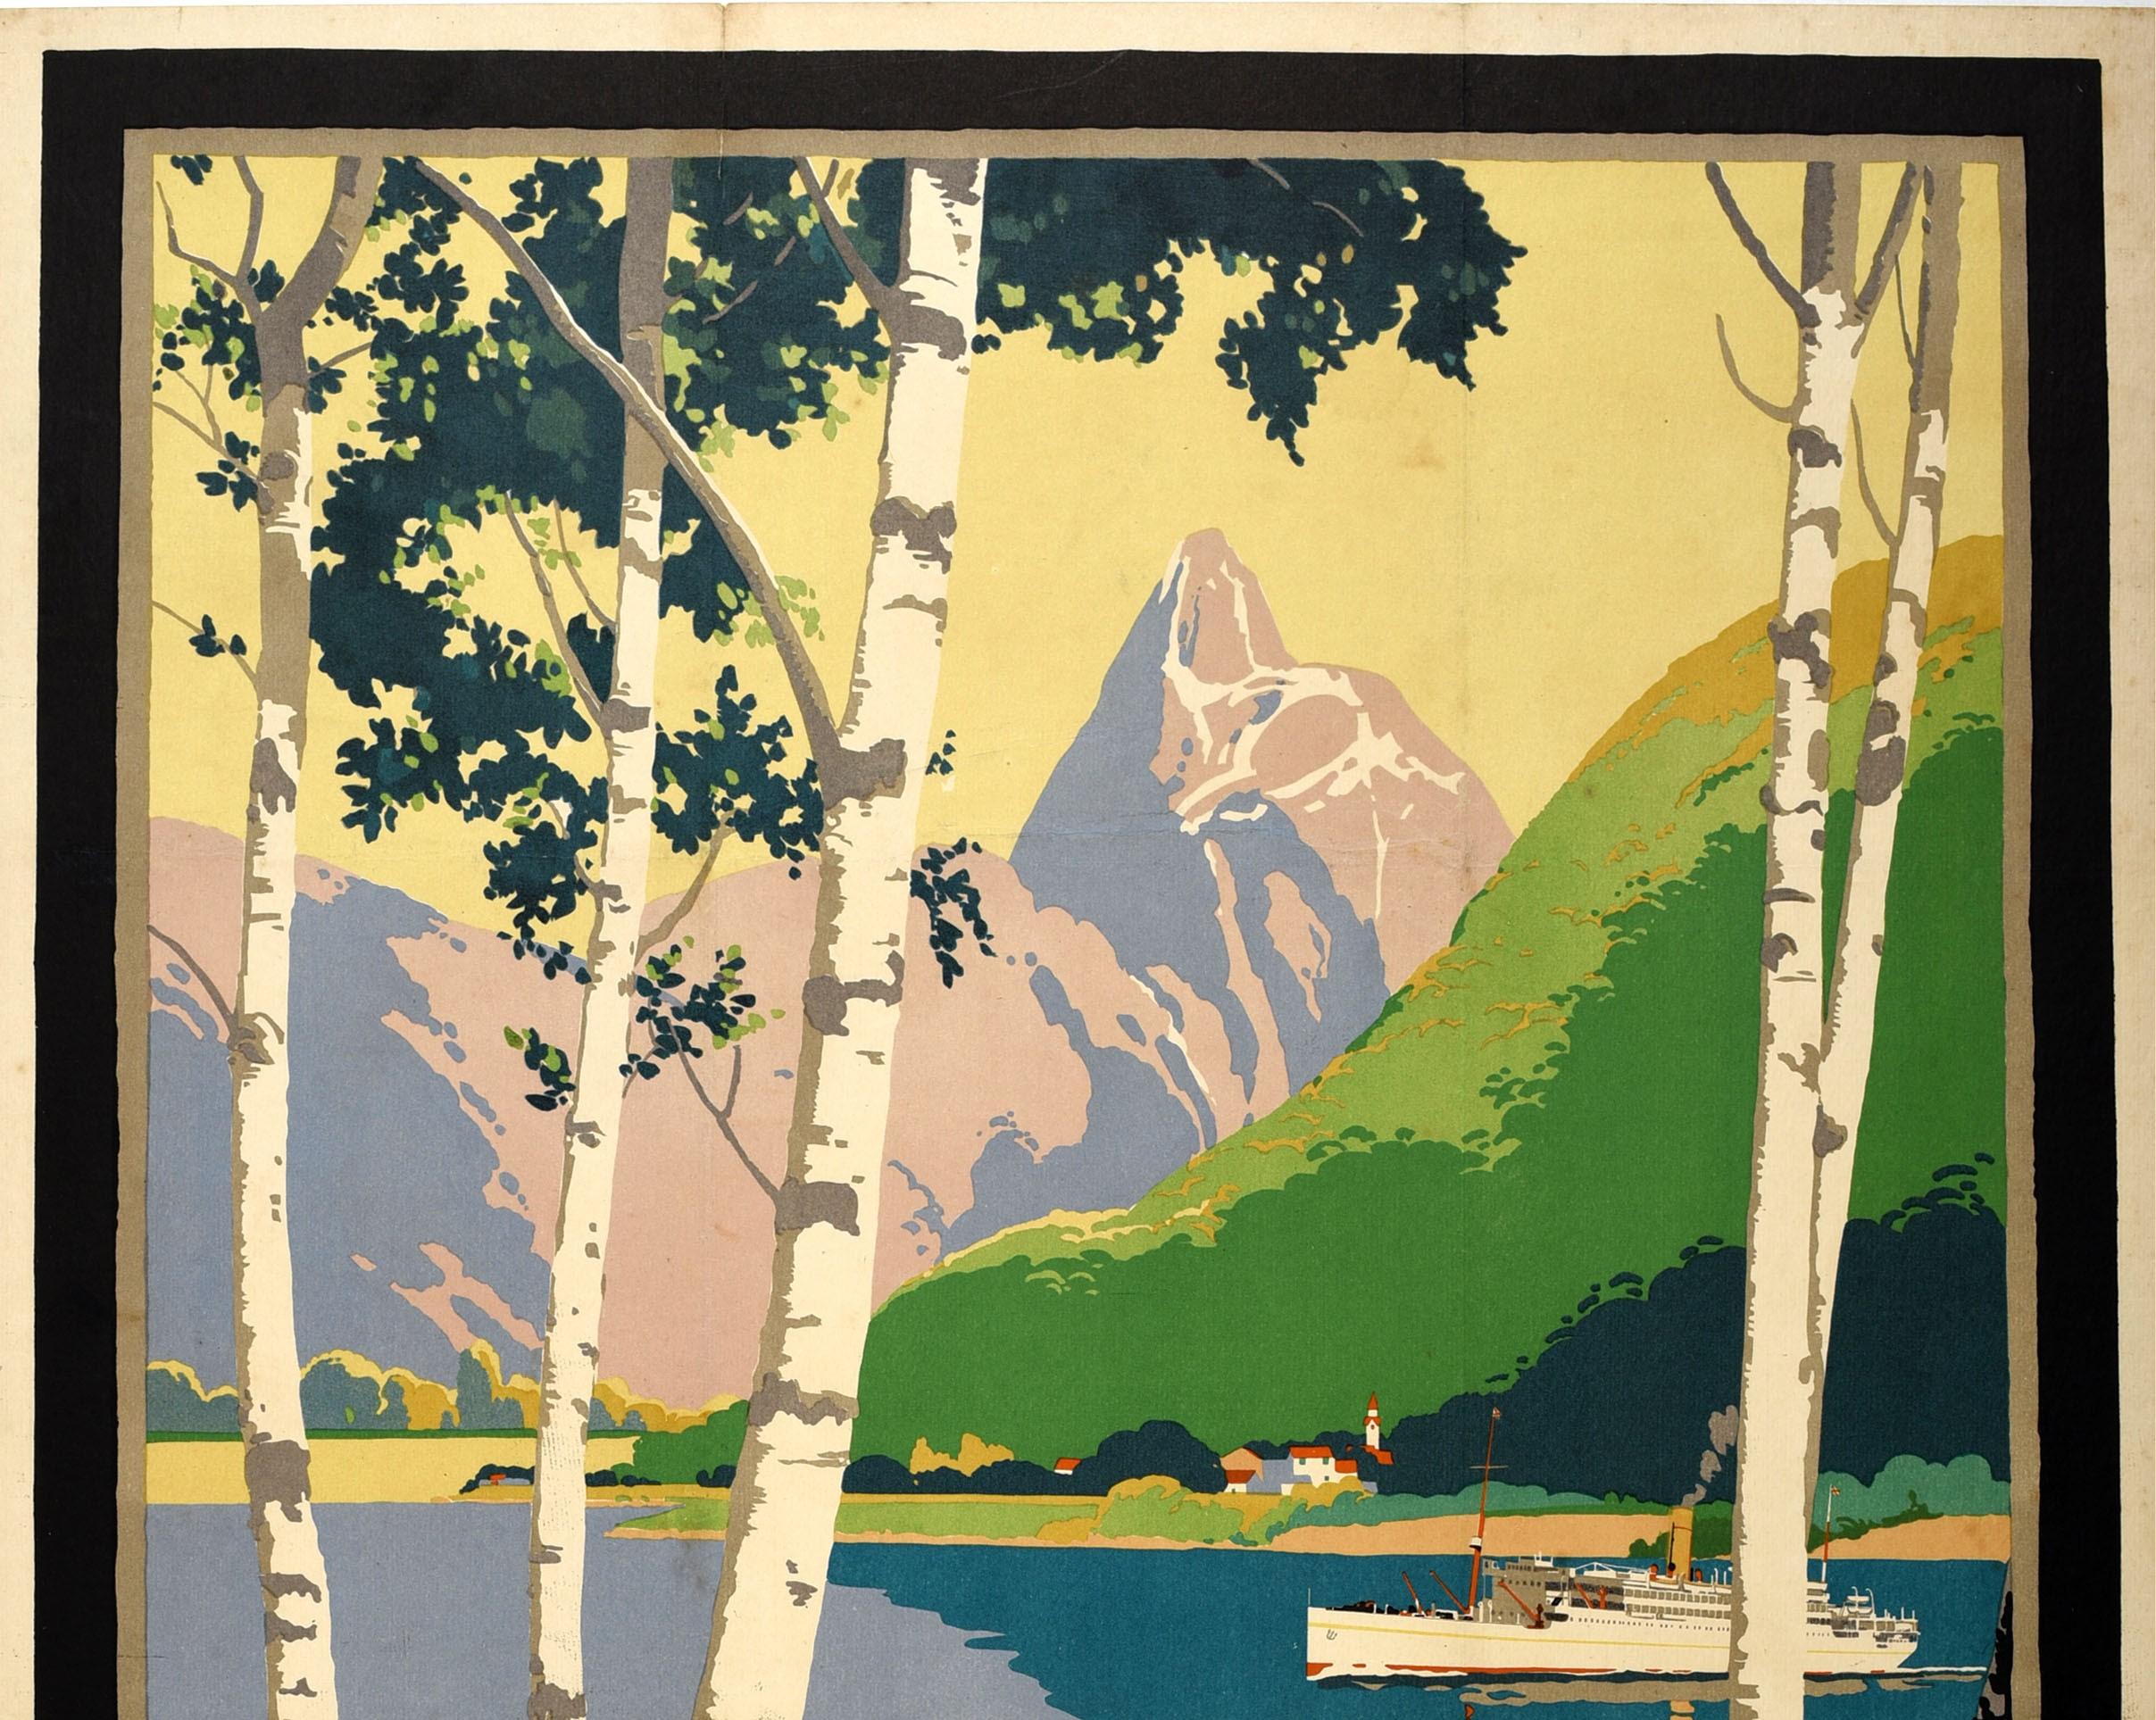 Original vintage travel poster for Royal Mail Line Atlantis Cruises featuring a stunning scenic view by the British poster designer, Percy Padden (1886-1965) depicting a cruise boat on a lake with silver birch trees in the foreground and green hills